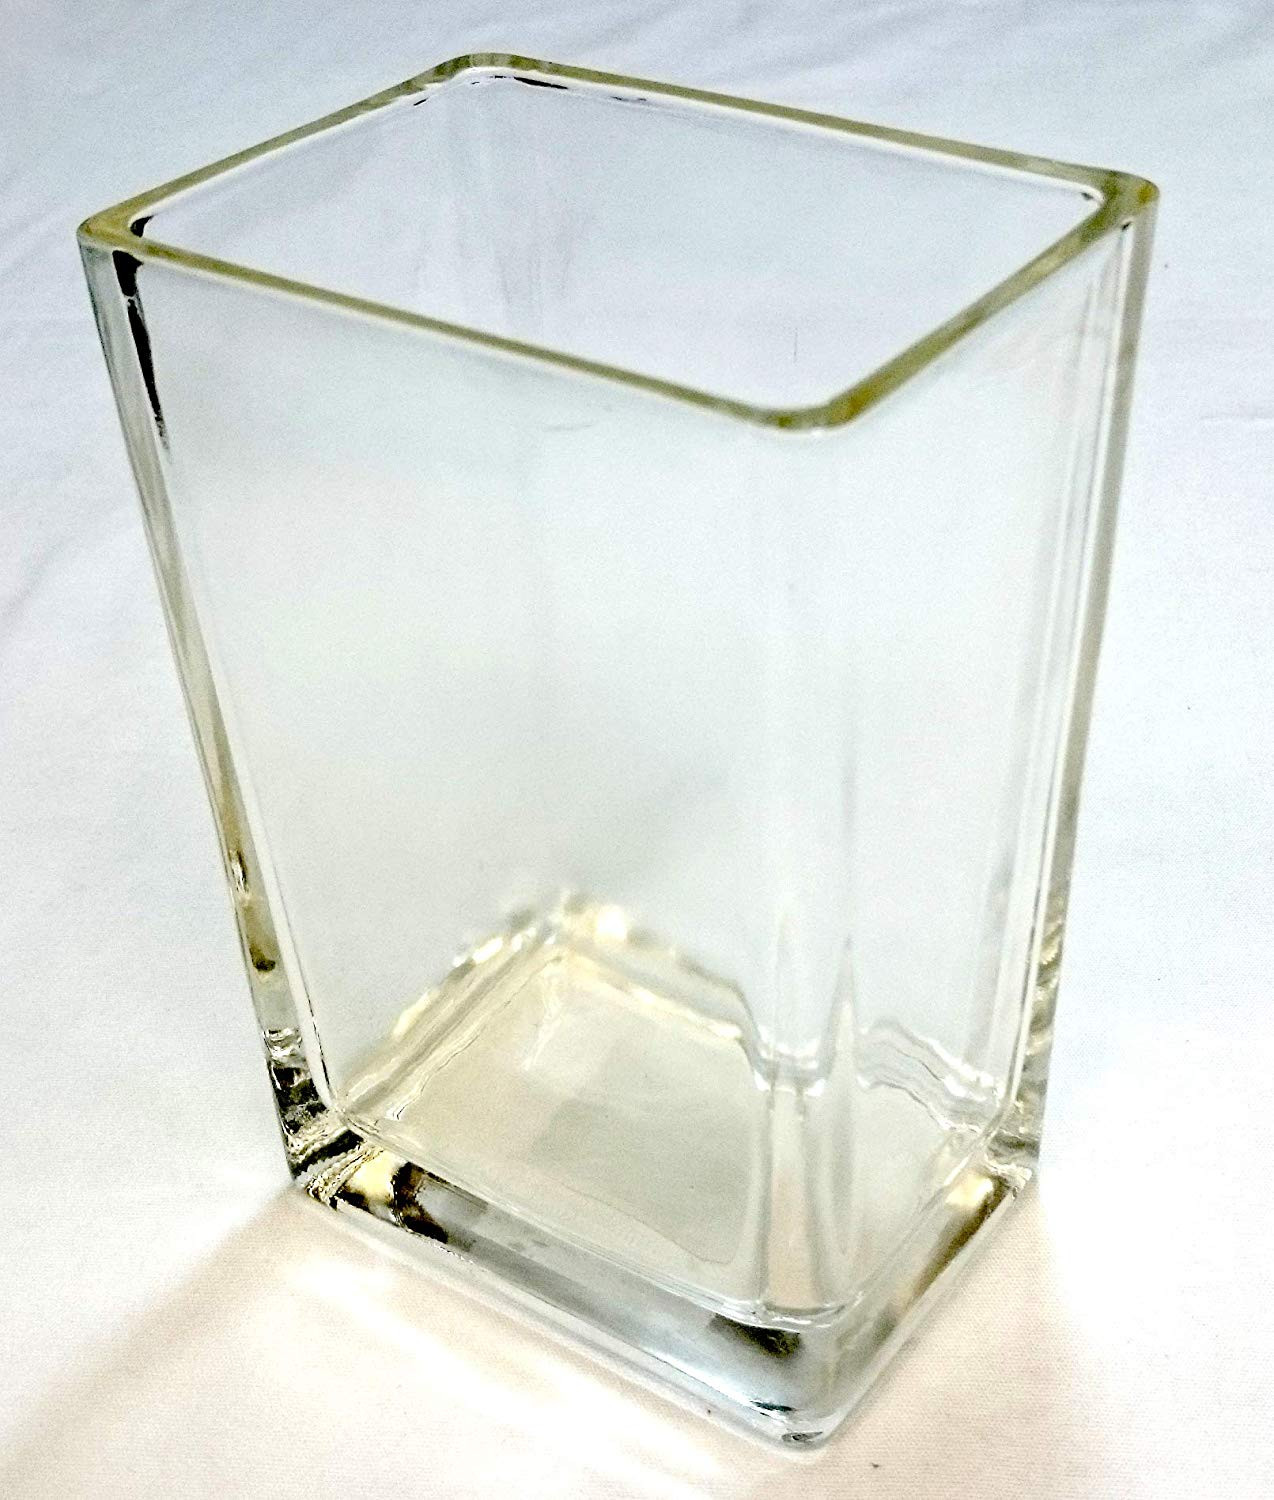 rectangular glass vases for centerpieces of amazon com concord global trading 6 rectangle 3x4 base glass vase for amazon com concord global trading 6 rectangle 3x4 base glass vase six inch high tapered clear pillar centerpiece 6x4x3 candleholder home kitchen